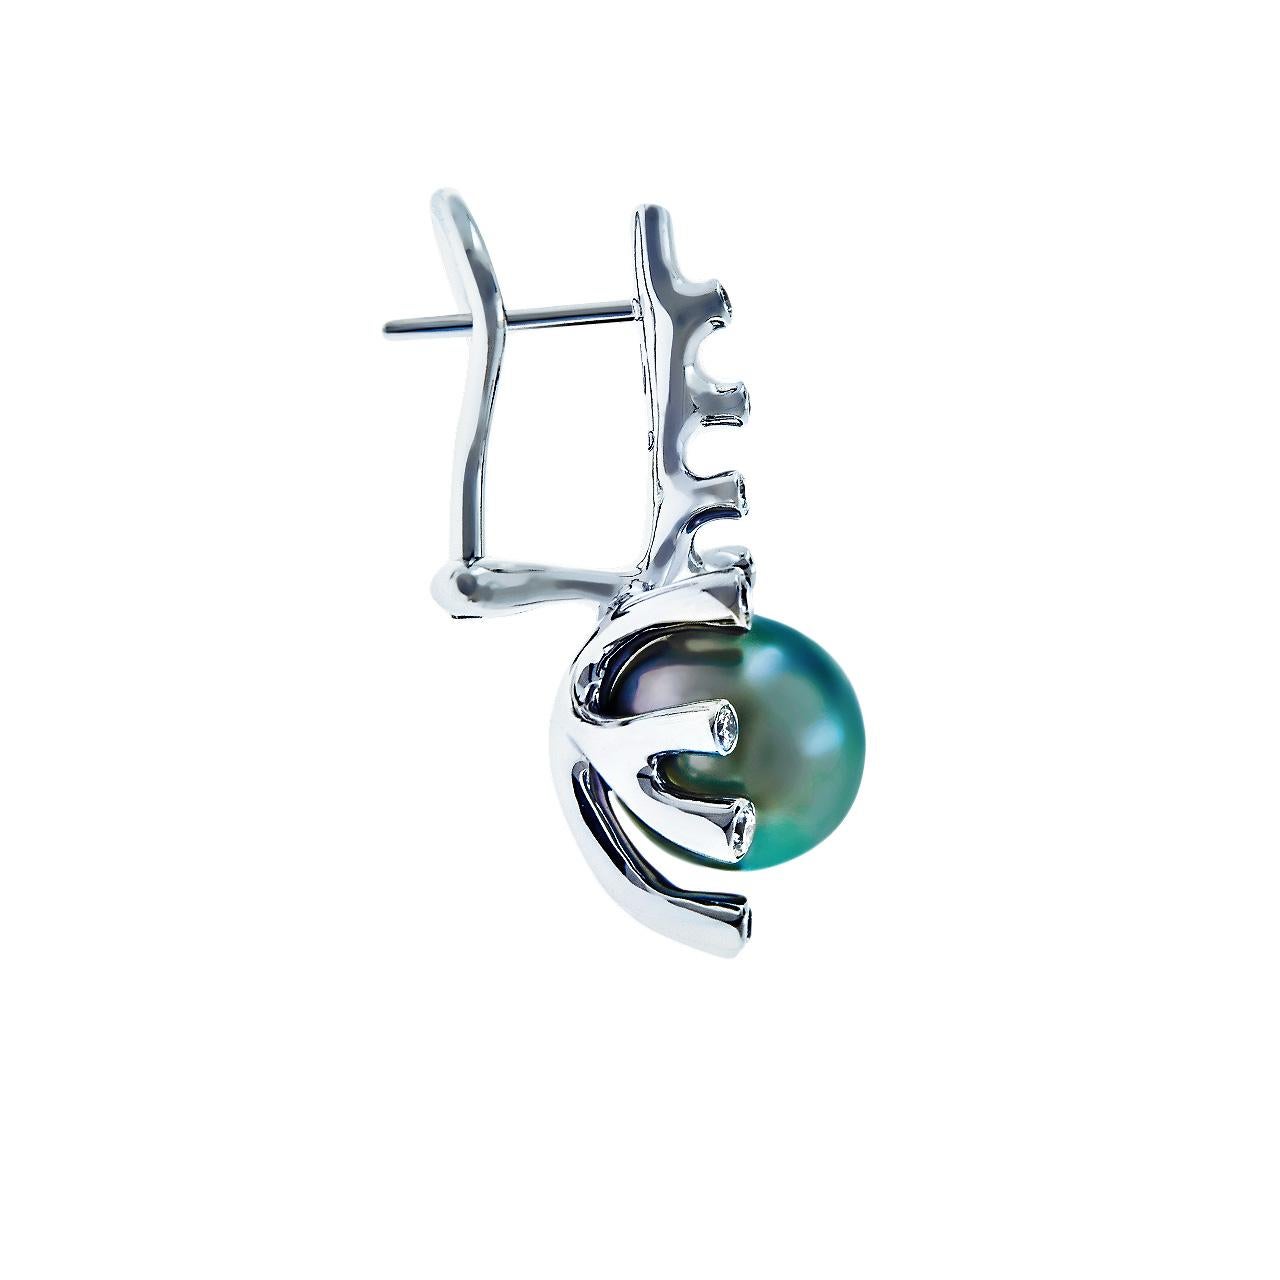 - 24 Round Diamonds - 0.40 ct, E-F/VS
- 8.5-9 mm Dark Tahitian pearl
- 18K White Gold 
- Weight: 9.47 g
This pair of earrings from the Corals collection of Jewellery Theatre features two lustrous Dark Tahitian pearls surrounded with gold corals with